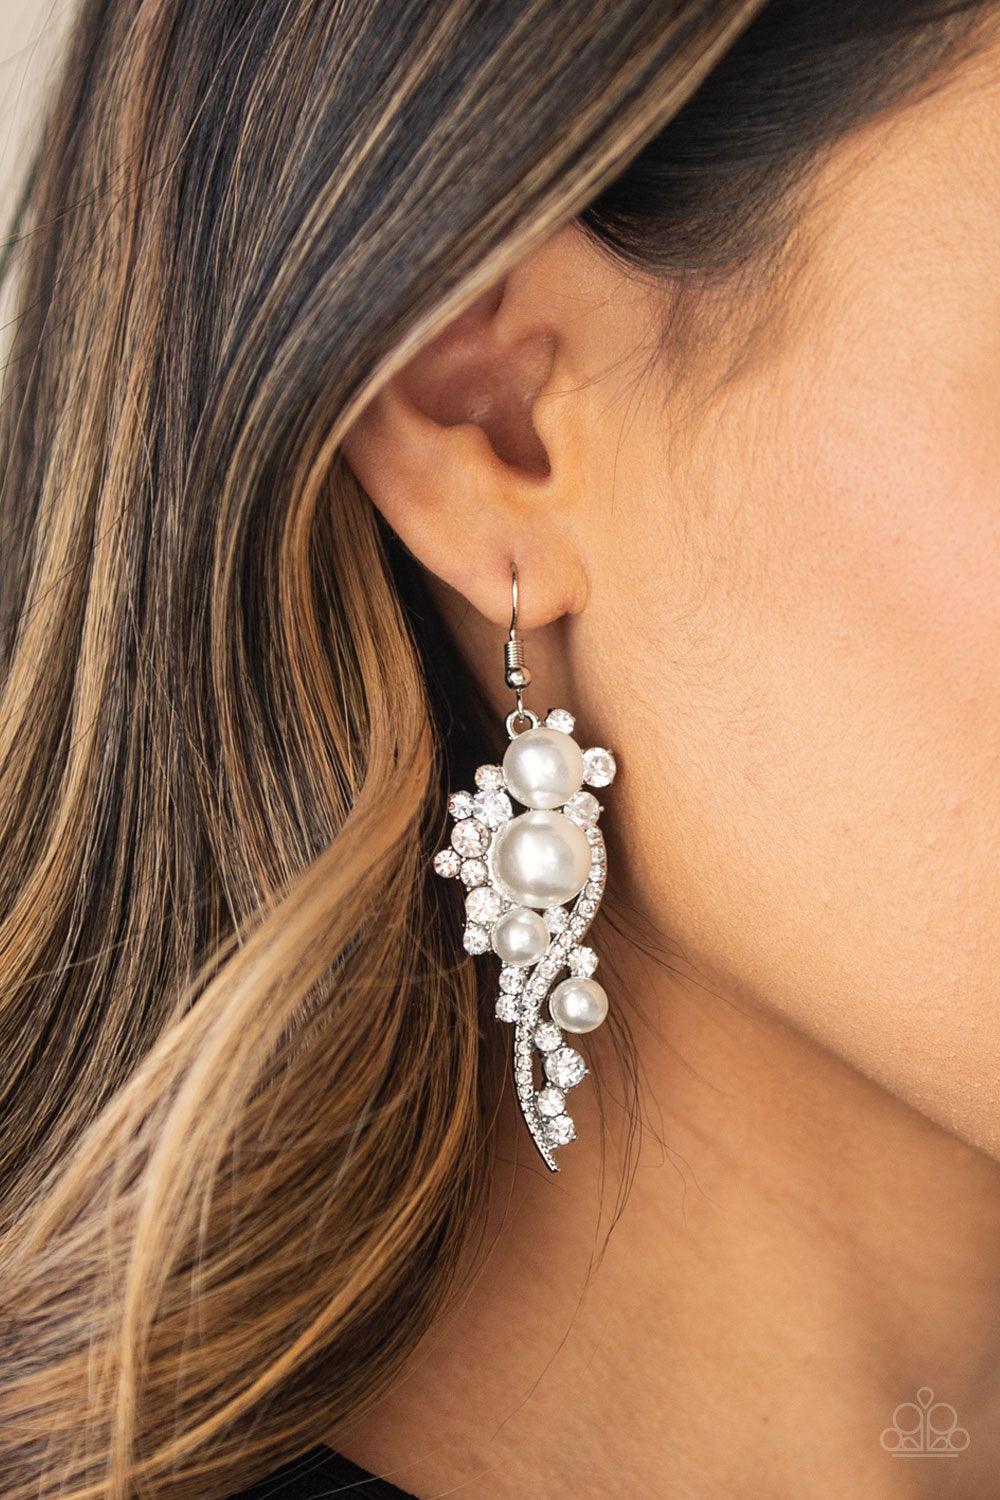 Paparazzi Accessories High-End Elegance - White Bubbly white pearls dot a glistening silver frame interwoven with ribbons of glittery white rhinestones, creating an elegant lure. Earring attaches to a standard fishhook fitting. Jewelry